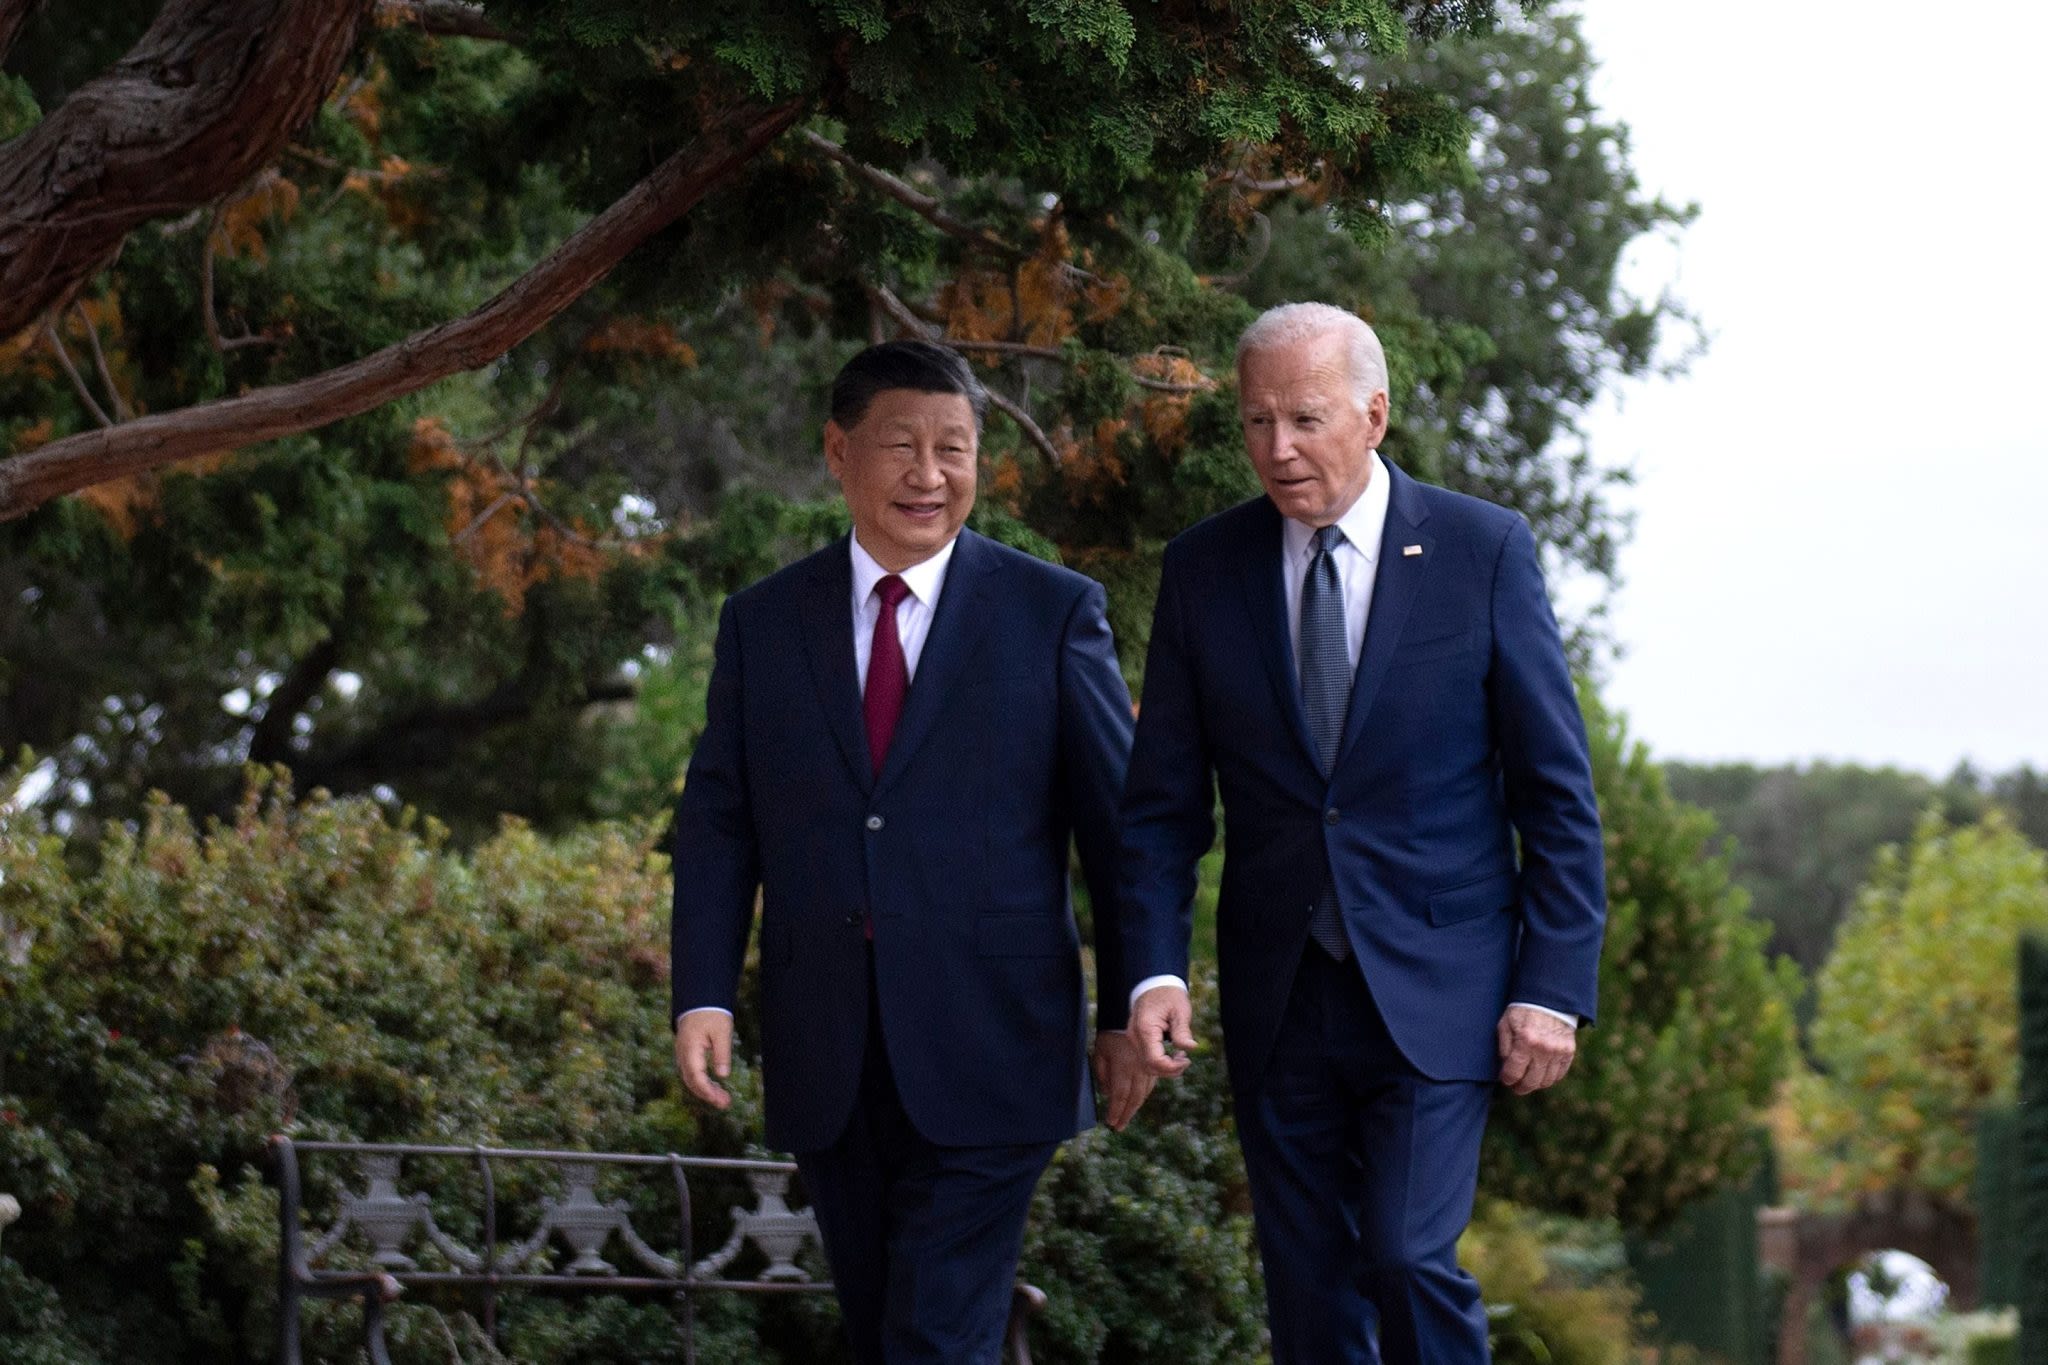 Economist Stephen Roach, who thinks China has a gloomy economic future, says Biden is pushing the two countries into a ‘forever’ trade war